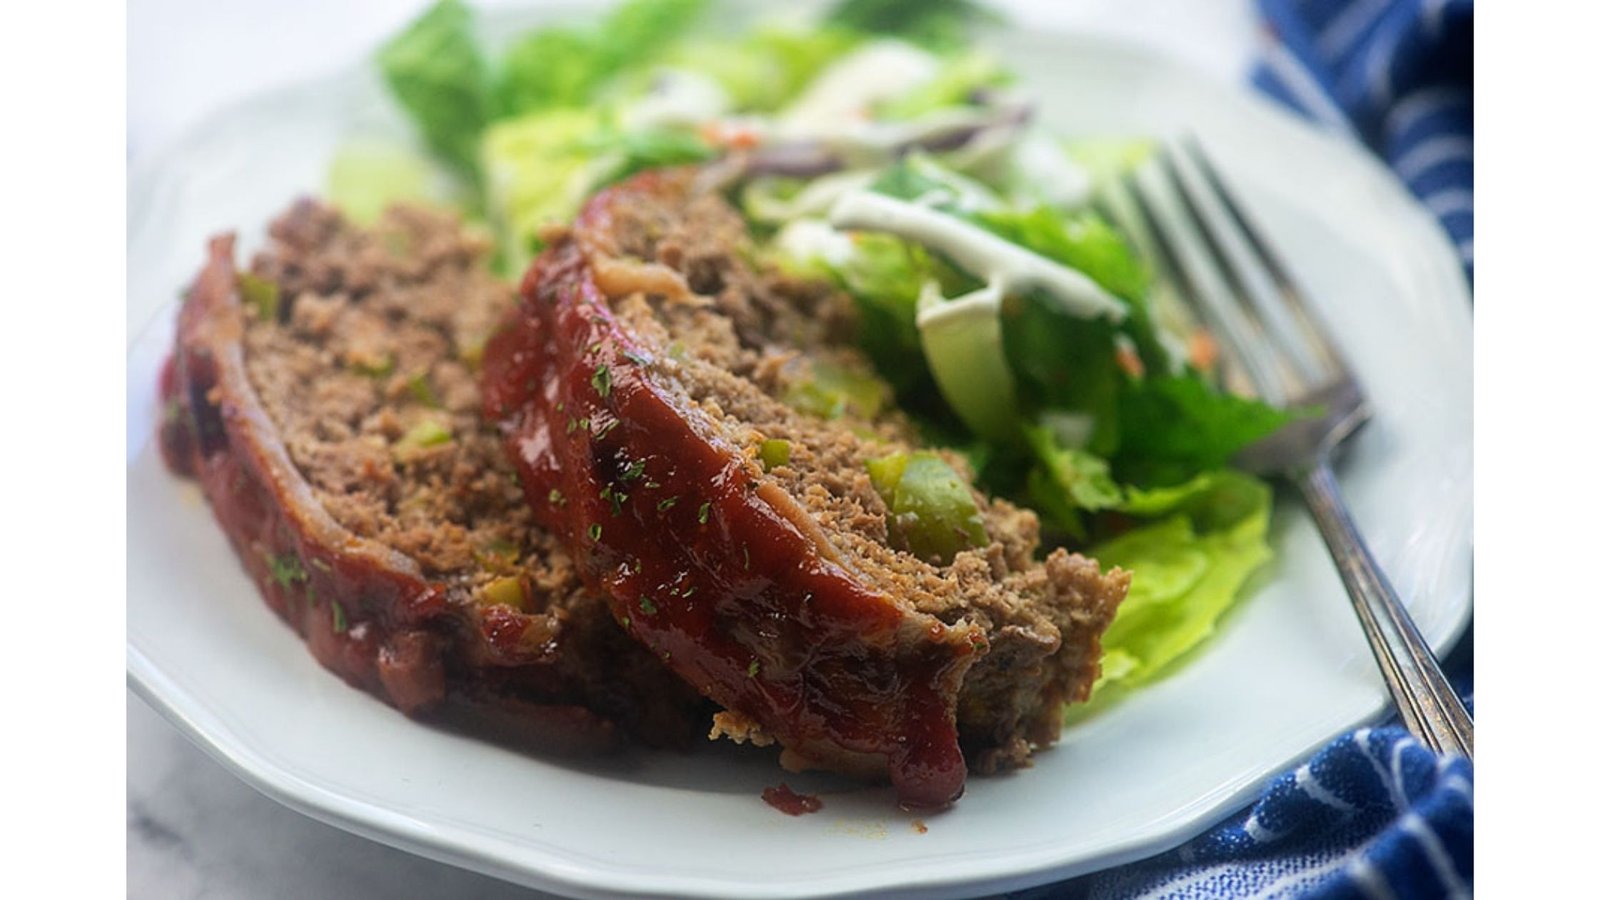 Low carb meatloaf recipe by The Low Carb Life